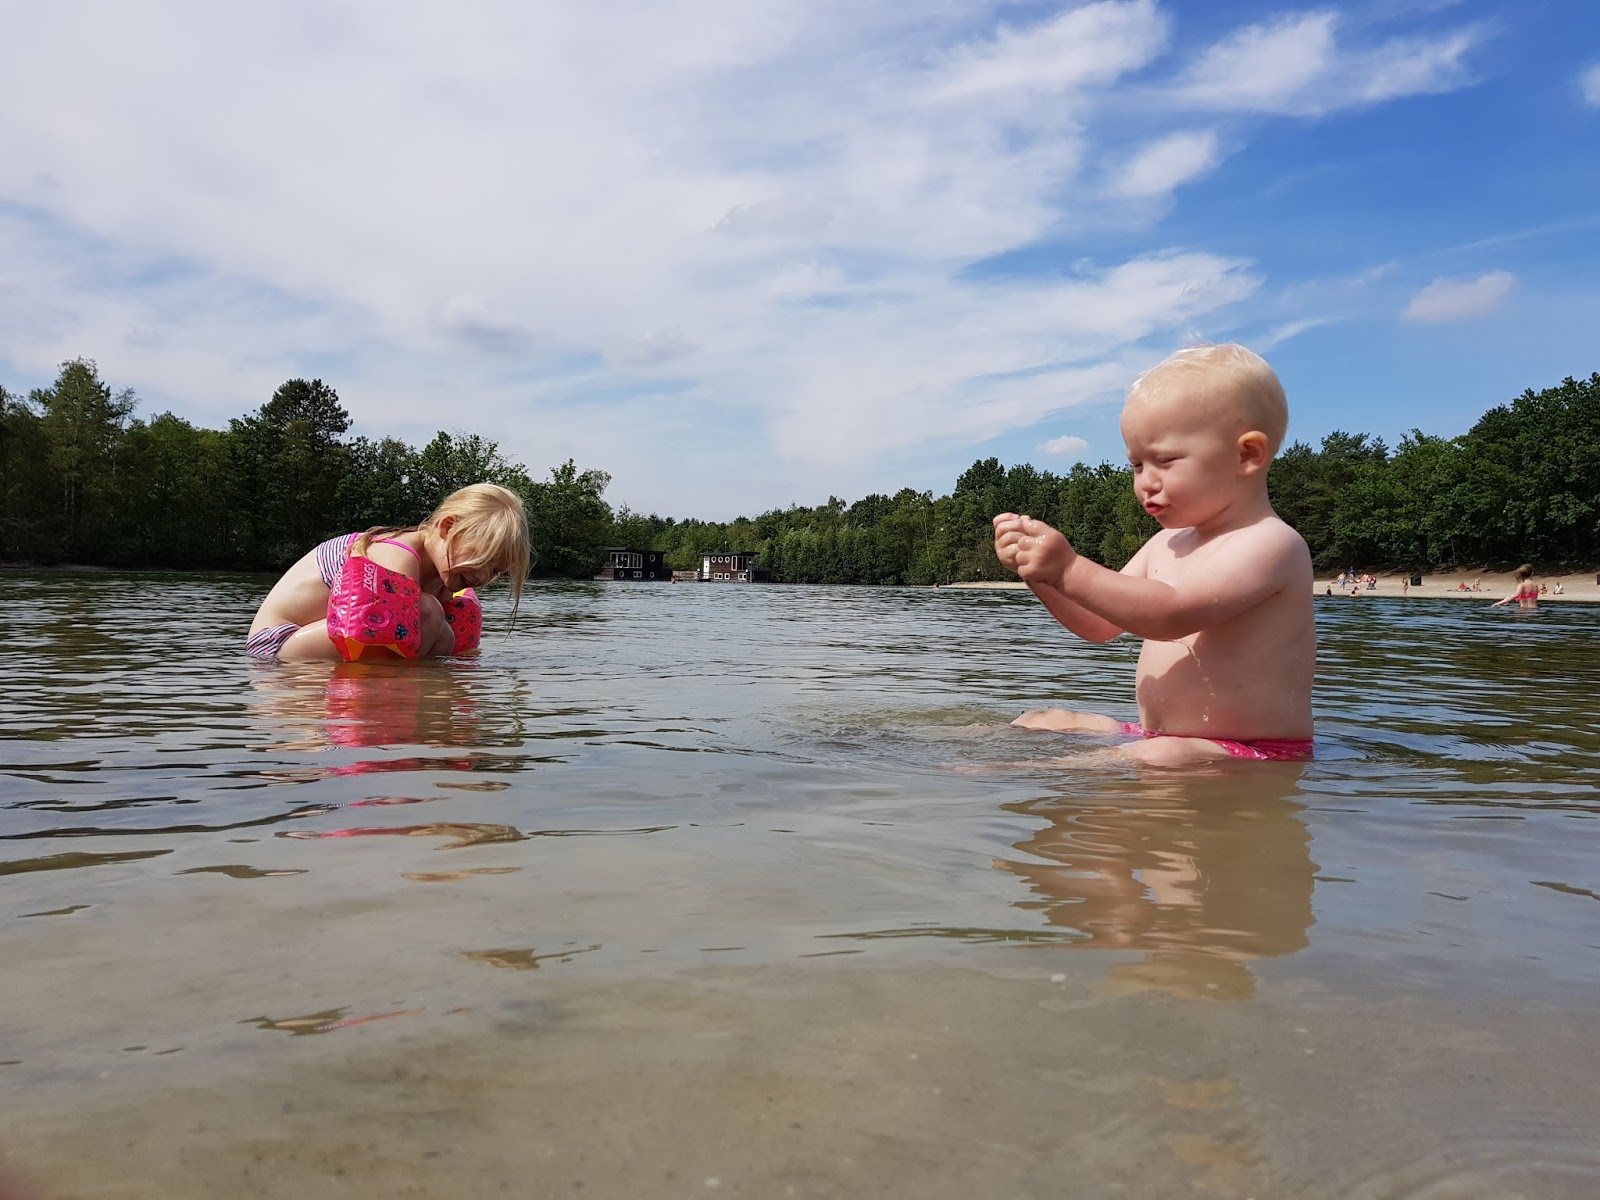 Two children sitting in a lake and playing